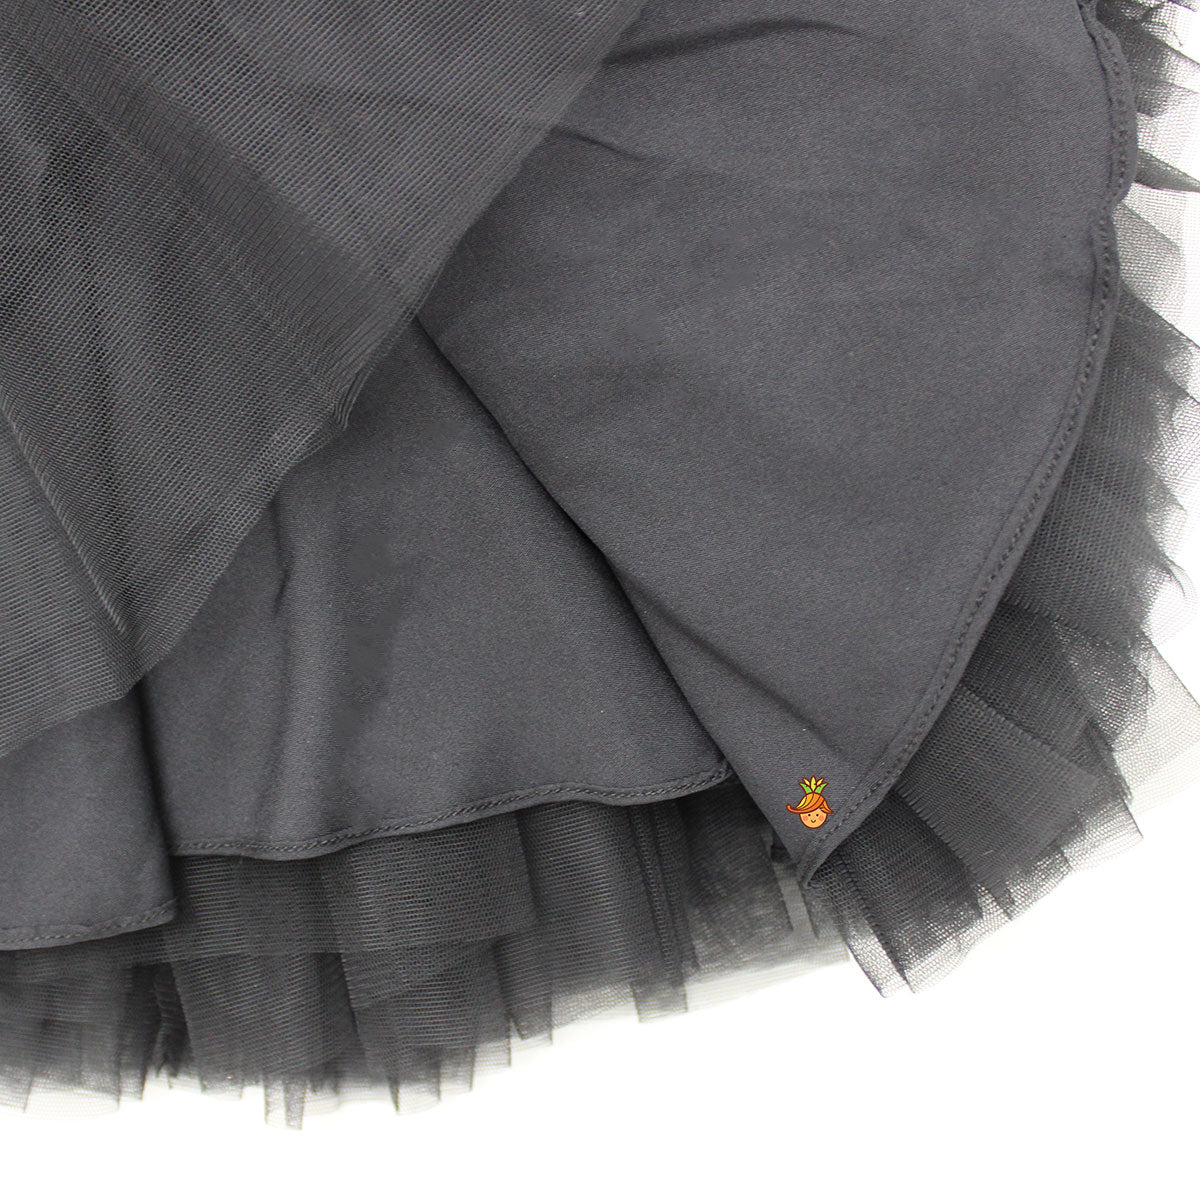 Exquisite Pearls And Rose Embellished Frilly Black Scuba Dress